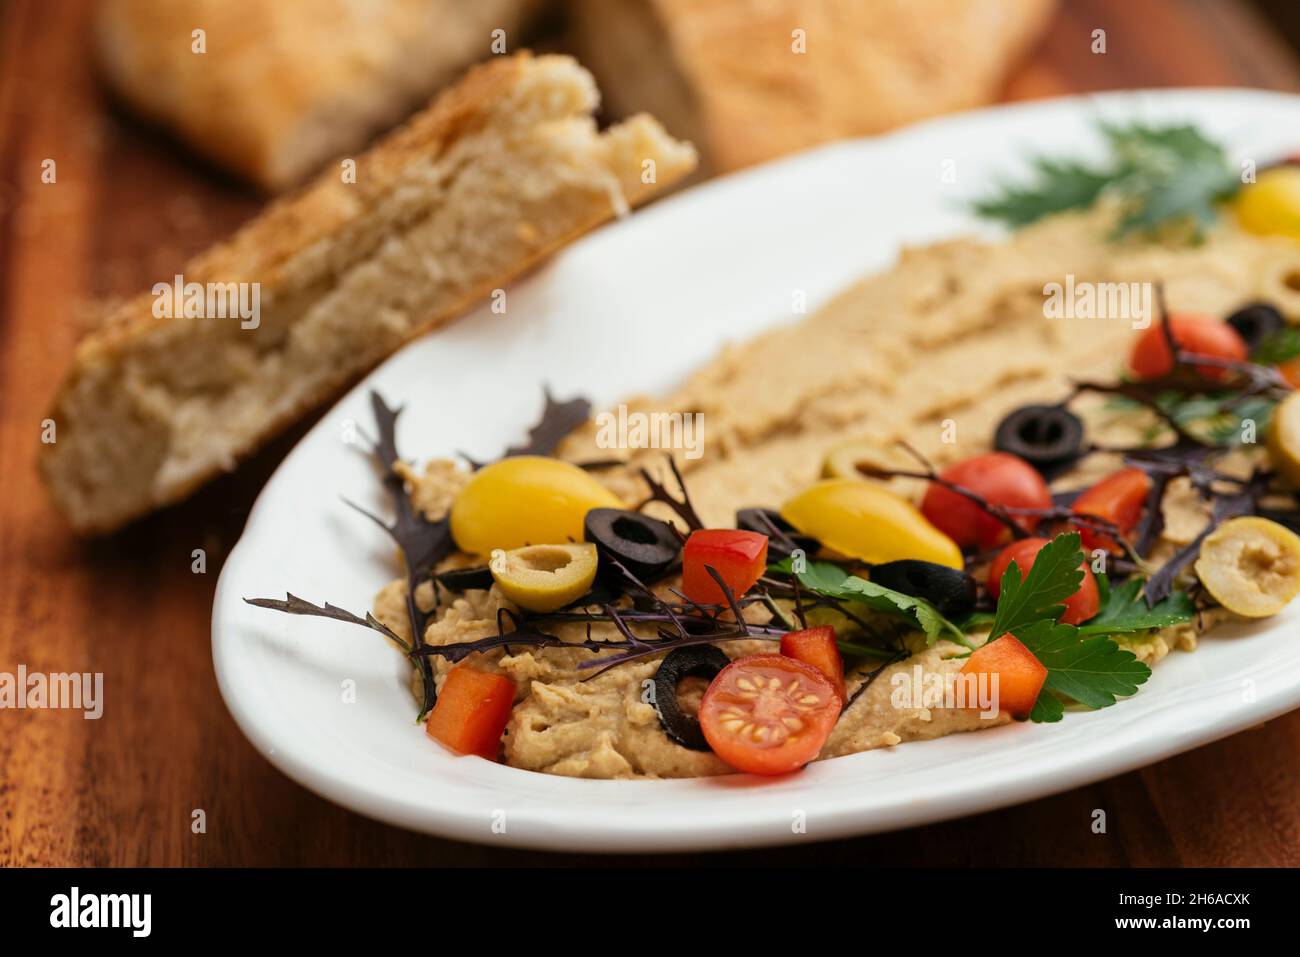 Home made hummus with flat bread. Stock Photo